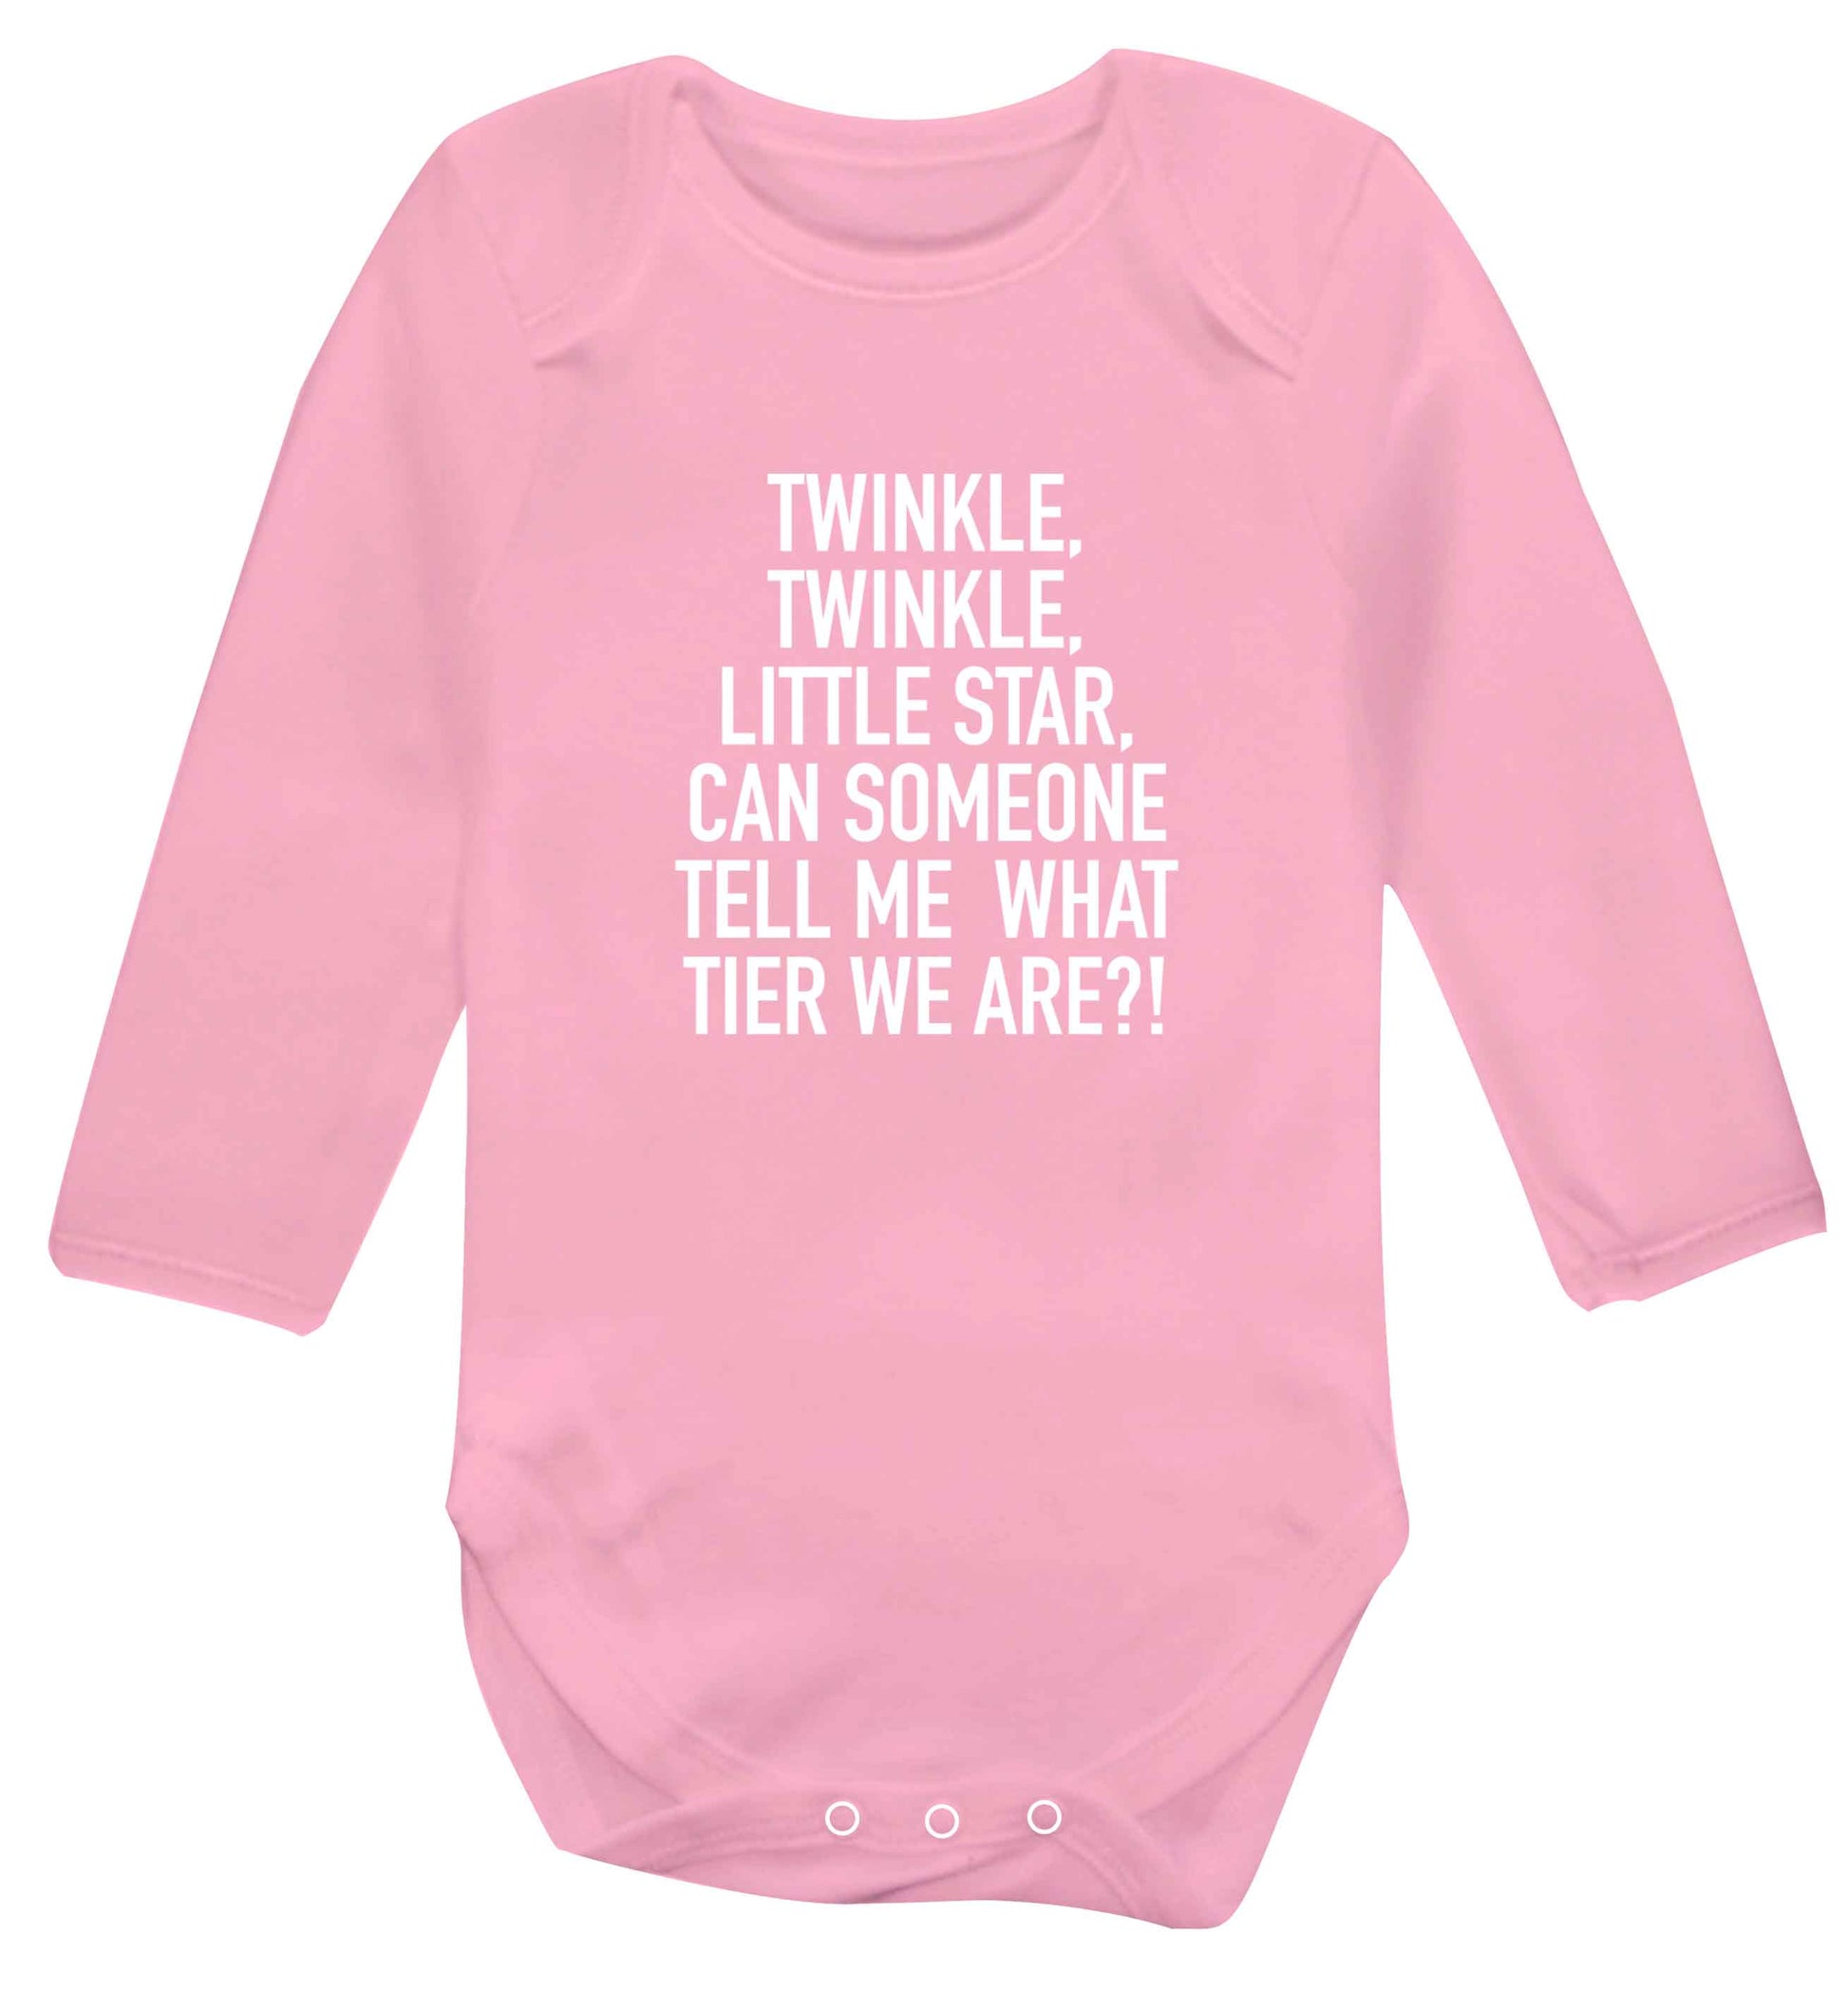 Twinkle twinkle, little star does anyone know what tier we are? baby vest long sleeved pale pink 6-12 months